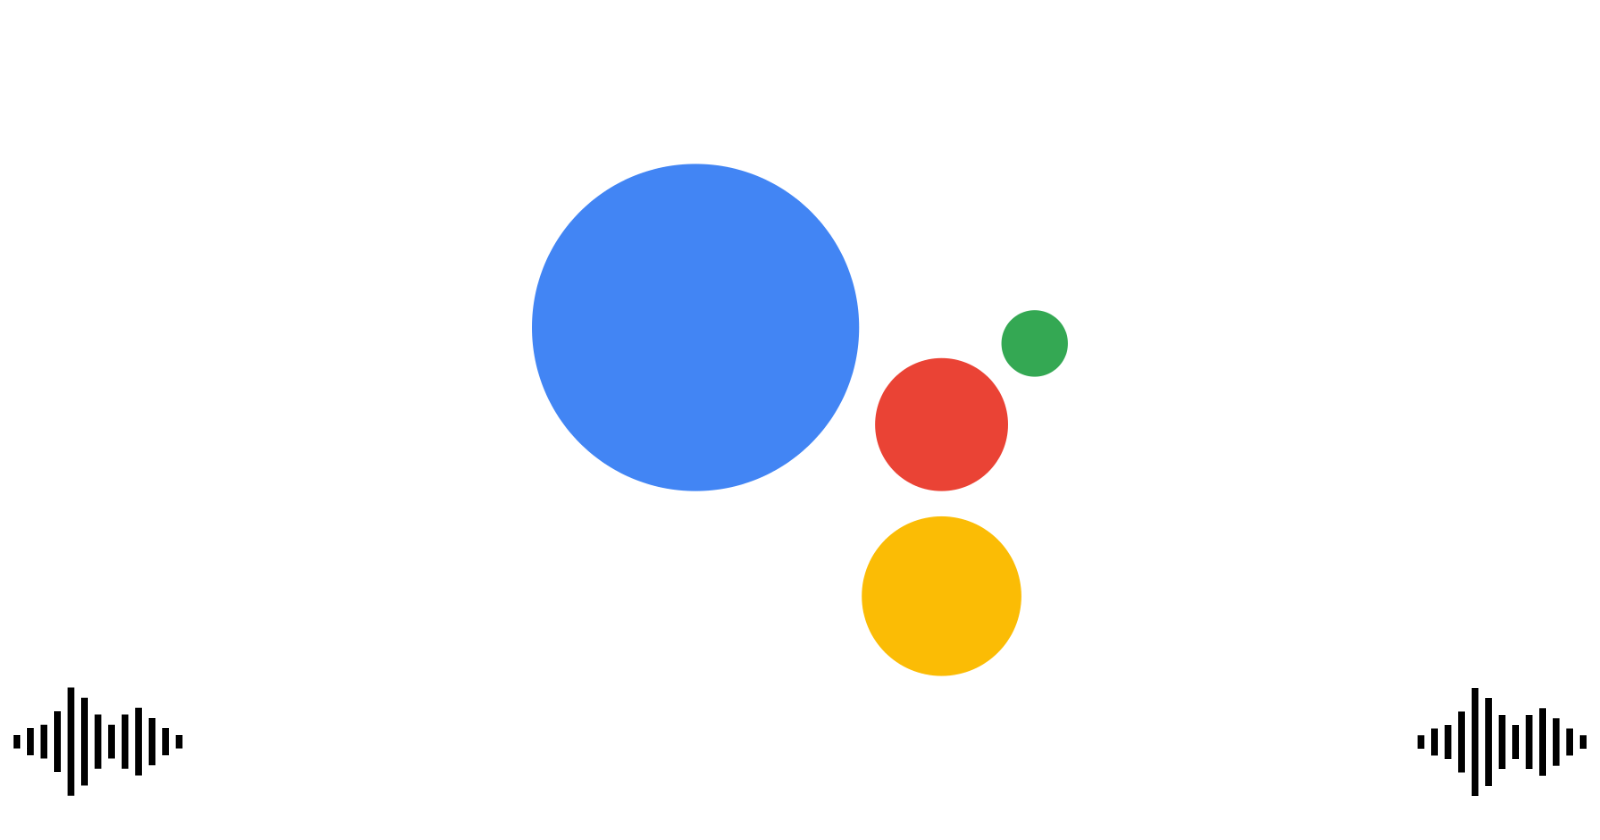 Steps to enable Google Assistant voice typing on Pixel phones